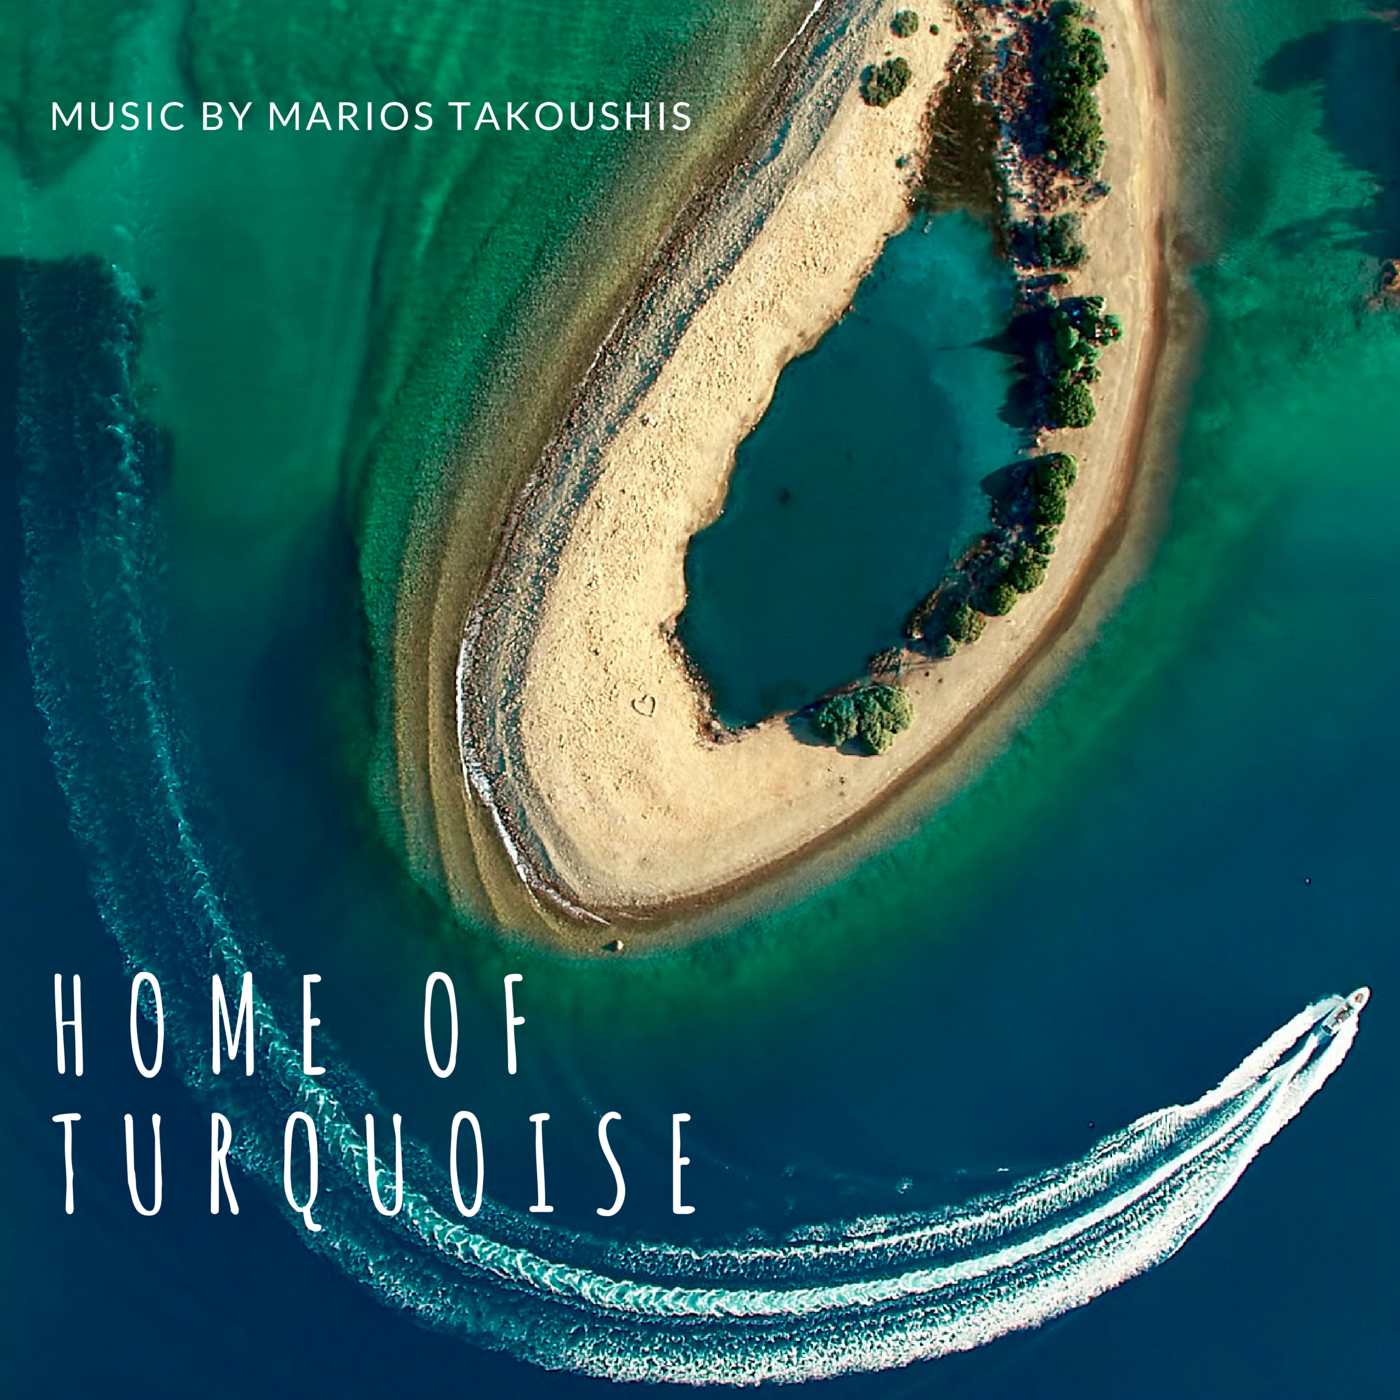 "Home of Turquoise"